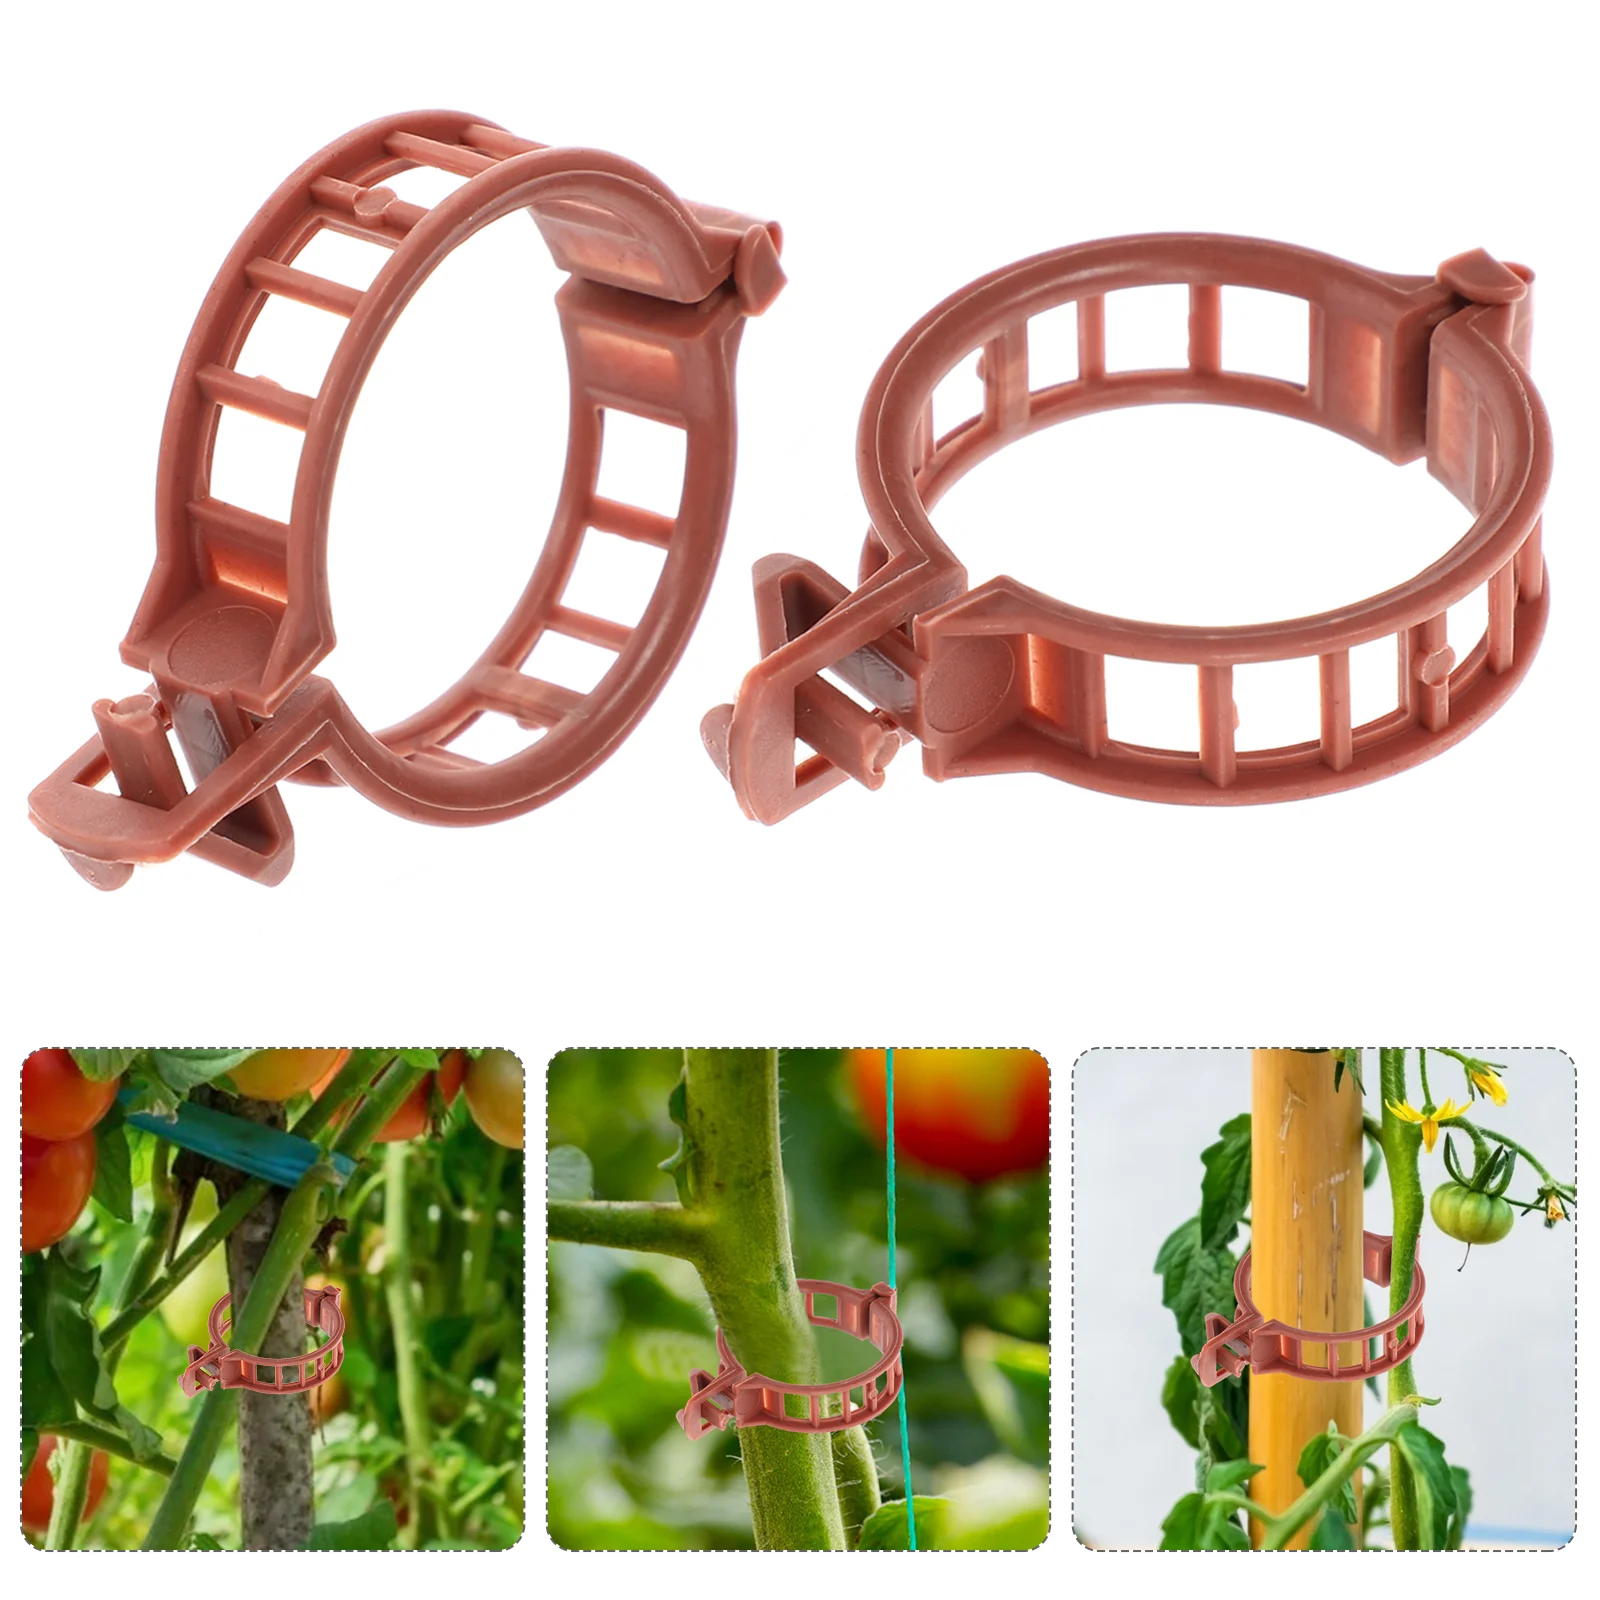 

Clips Greenhouse Support Gardening Supports Tomato Vine Fixing Plastic Stem Flower Cucamelon Plants